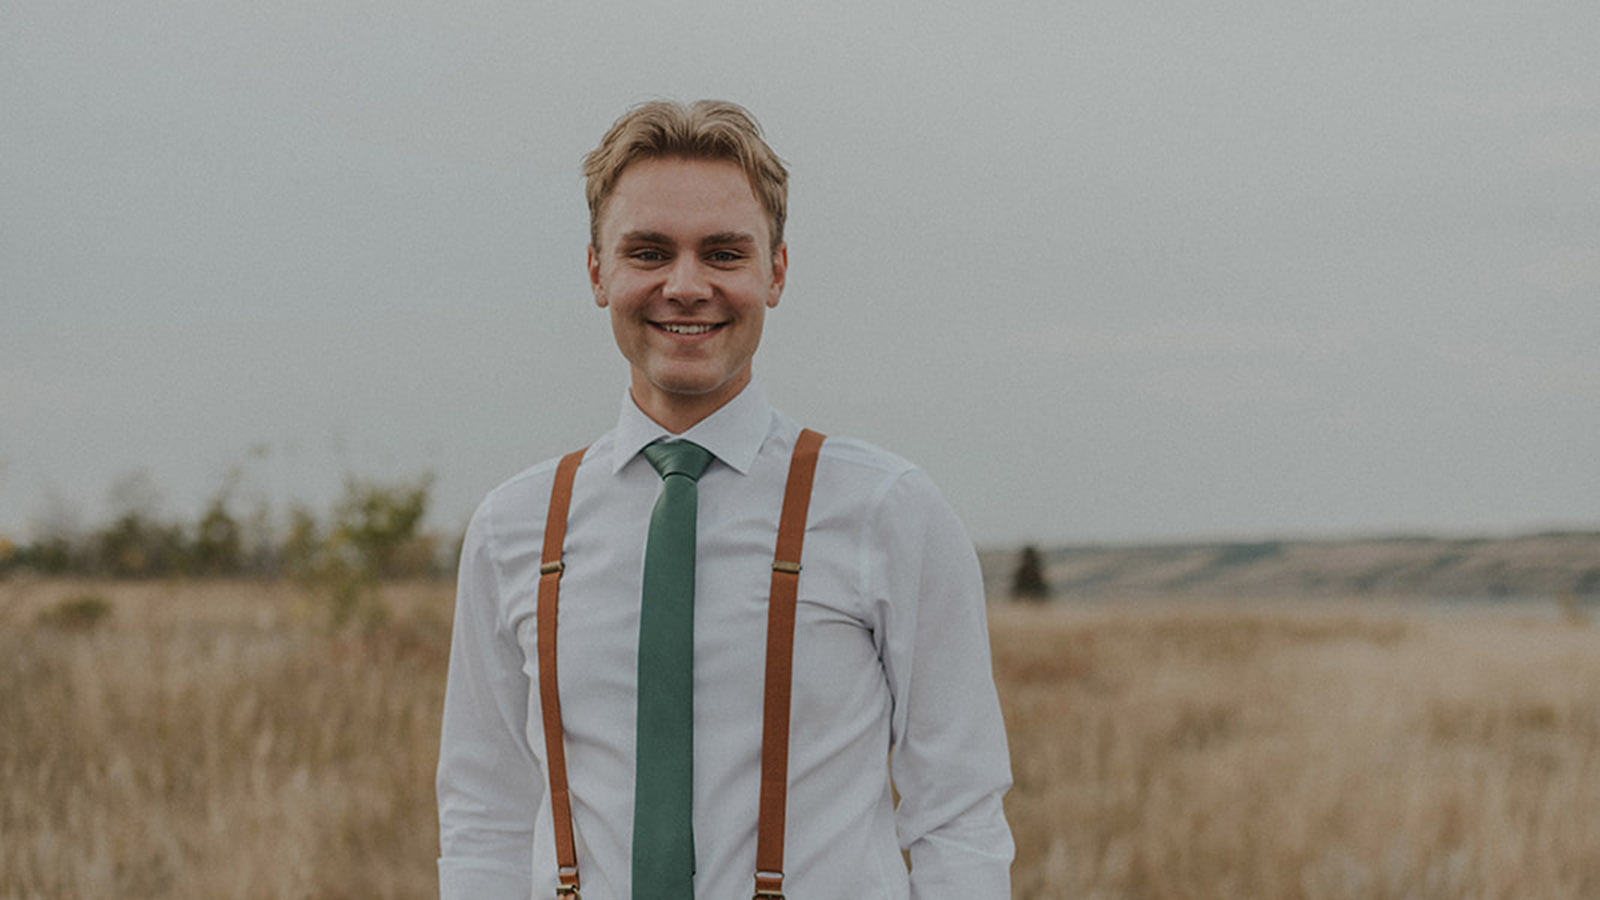 Portrait of student, waist up, smartly dressed standing in a field.